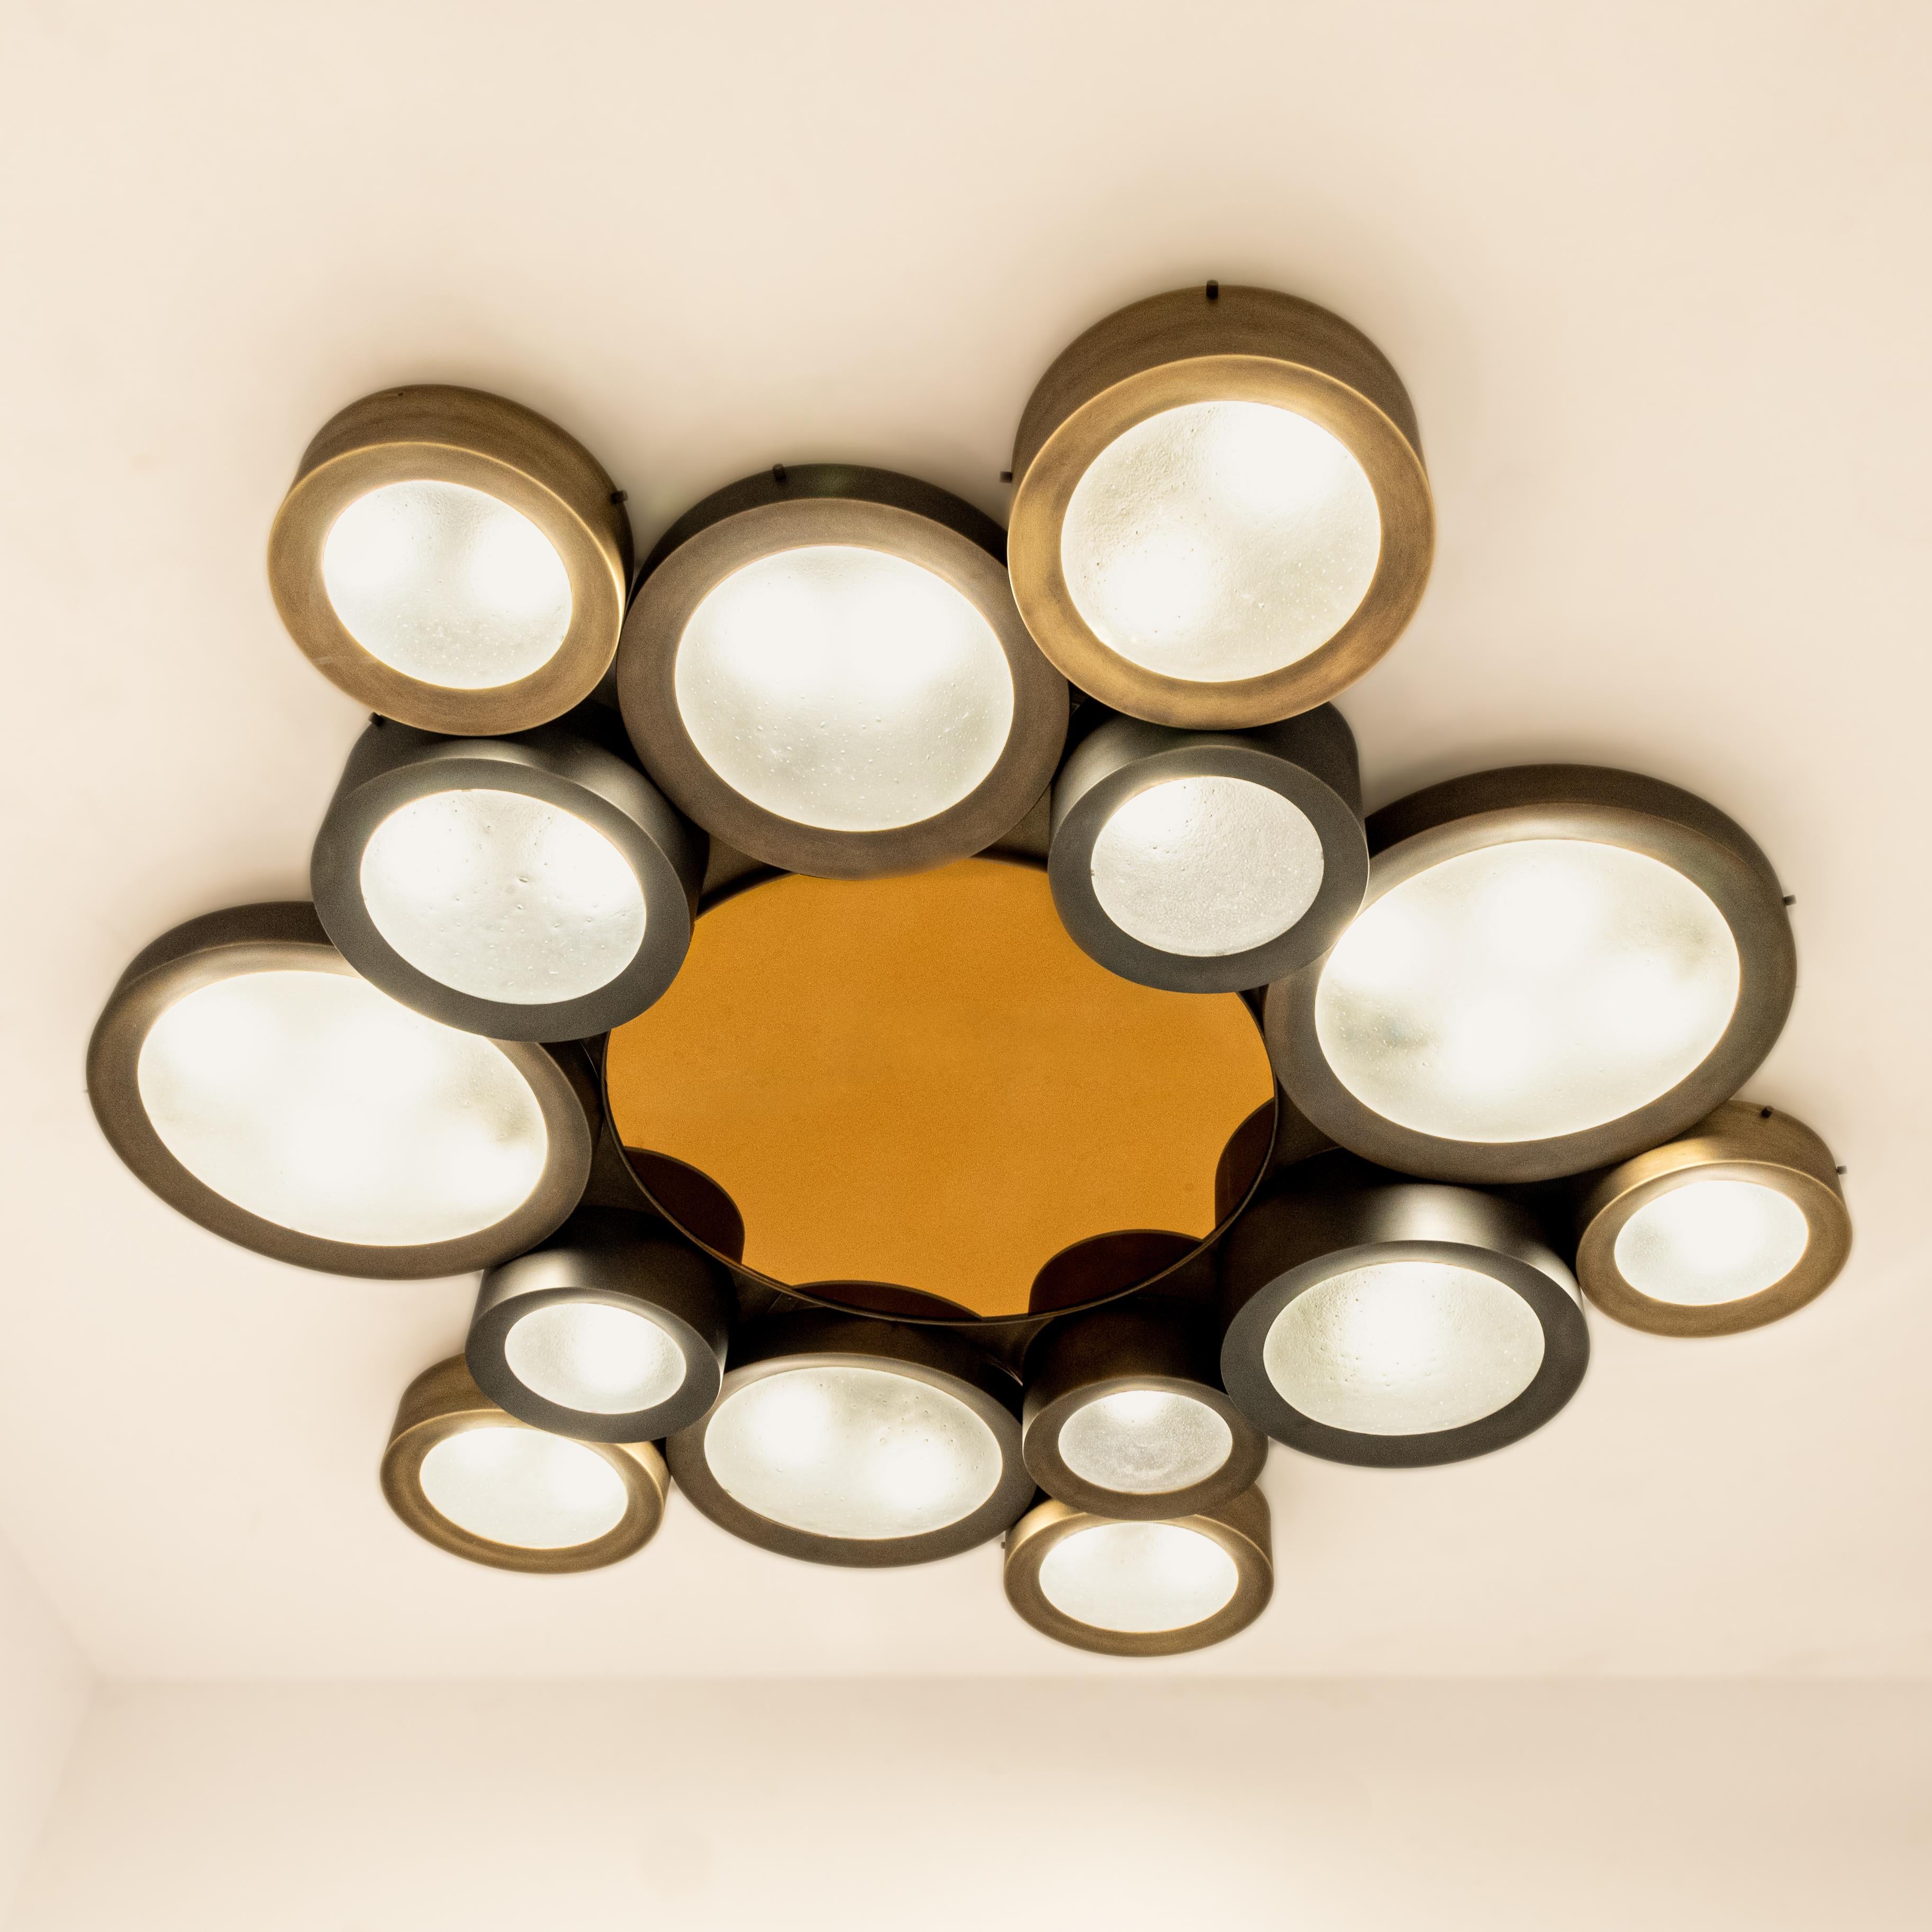 Helios 66 Ceiling Light by Gaspare Asaro-Satin Brass and Satin Nickel Finish For Sale 1